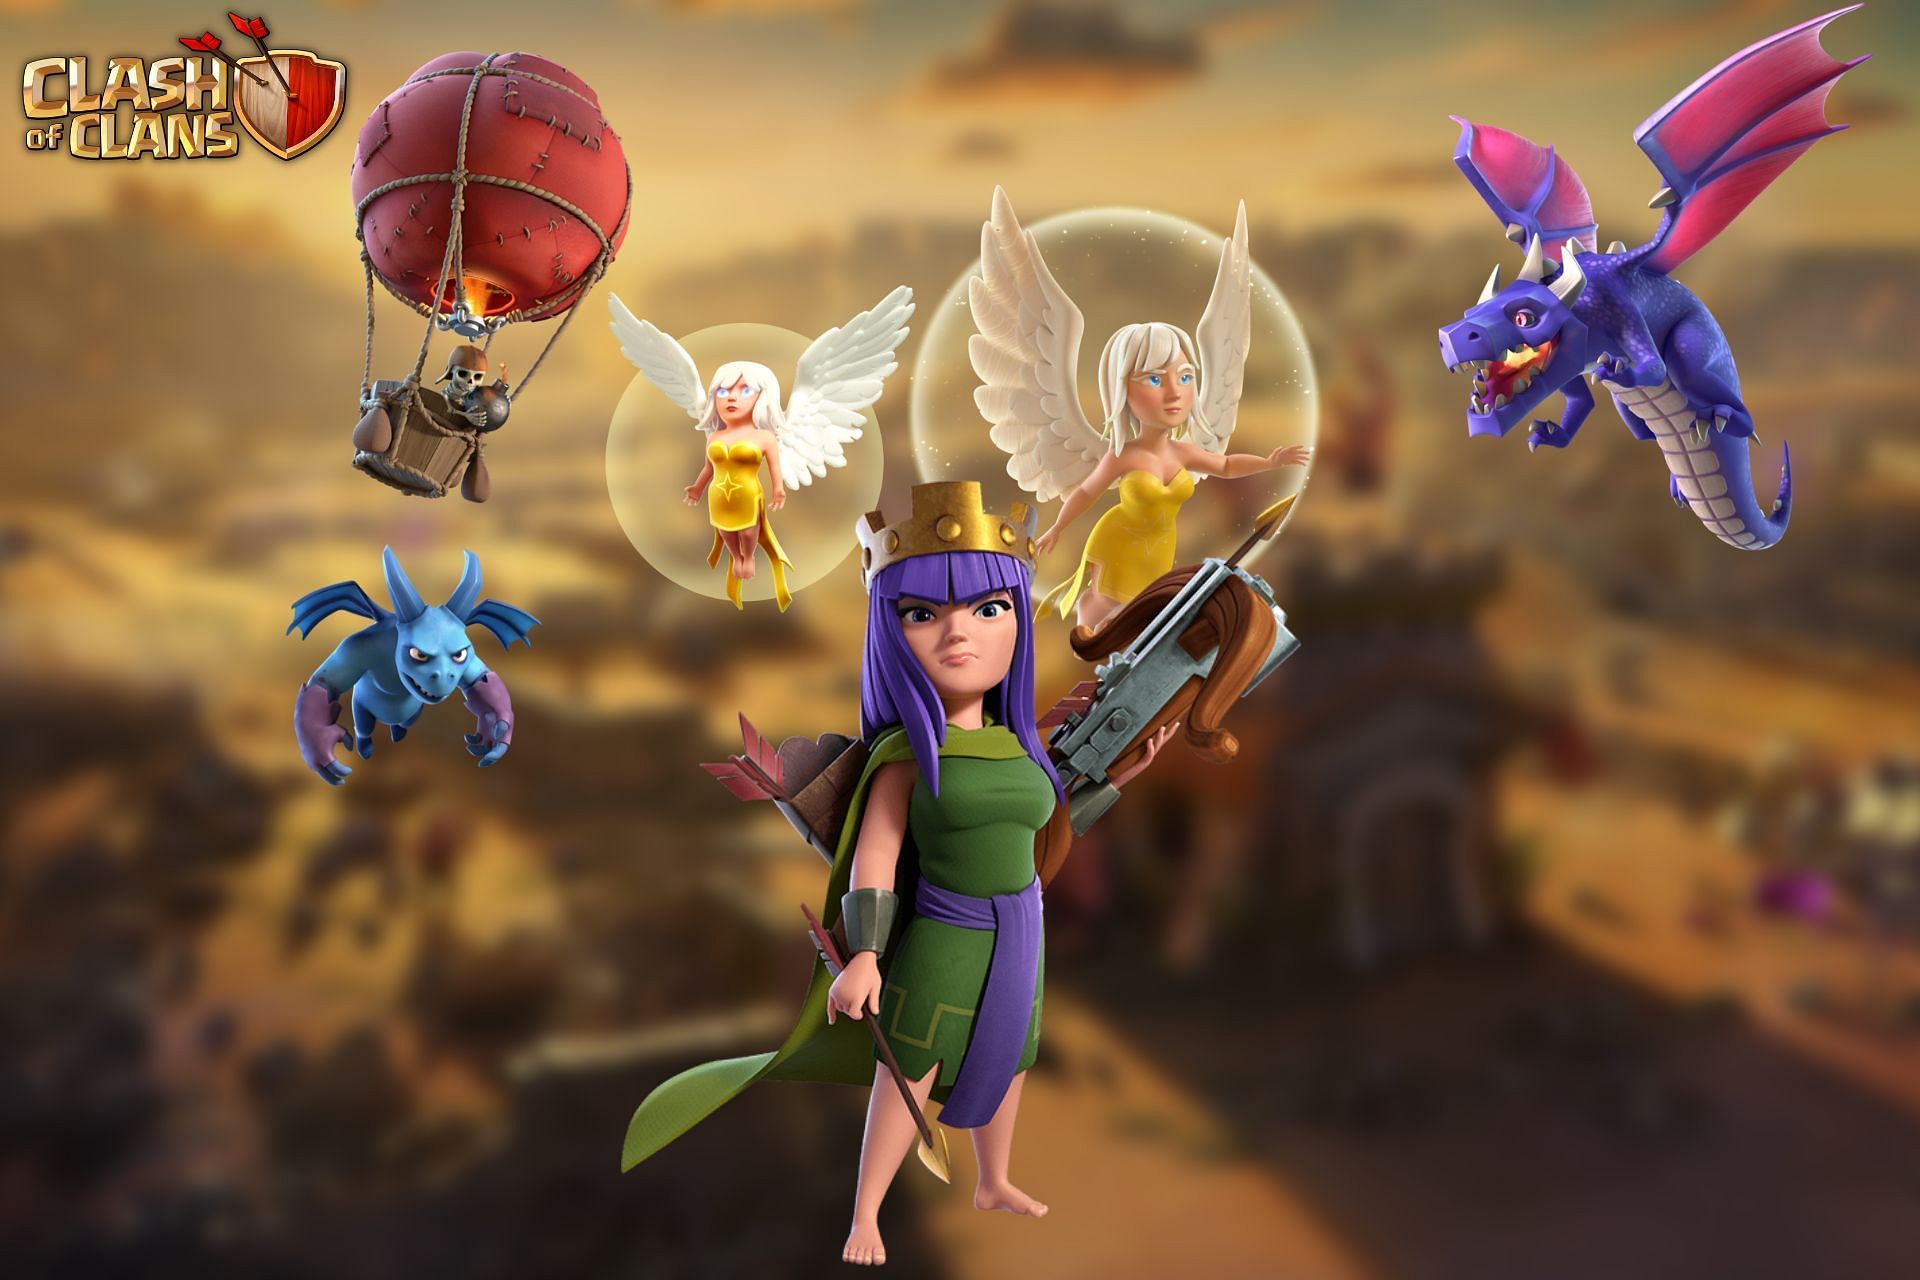 Queen Charge DragLoon attack strategy in Clash of Clans (Image via Sportskeeda)